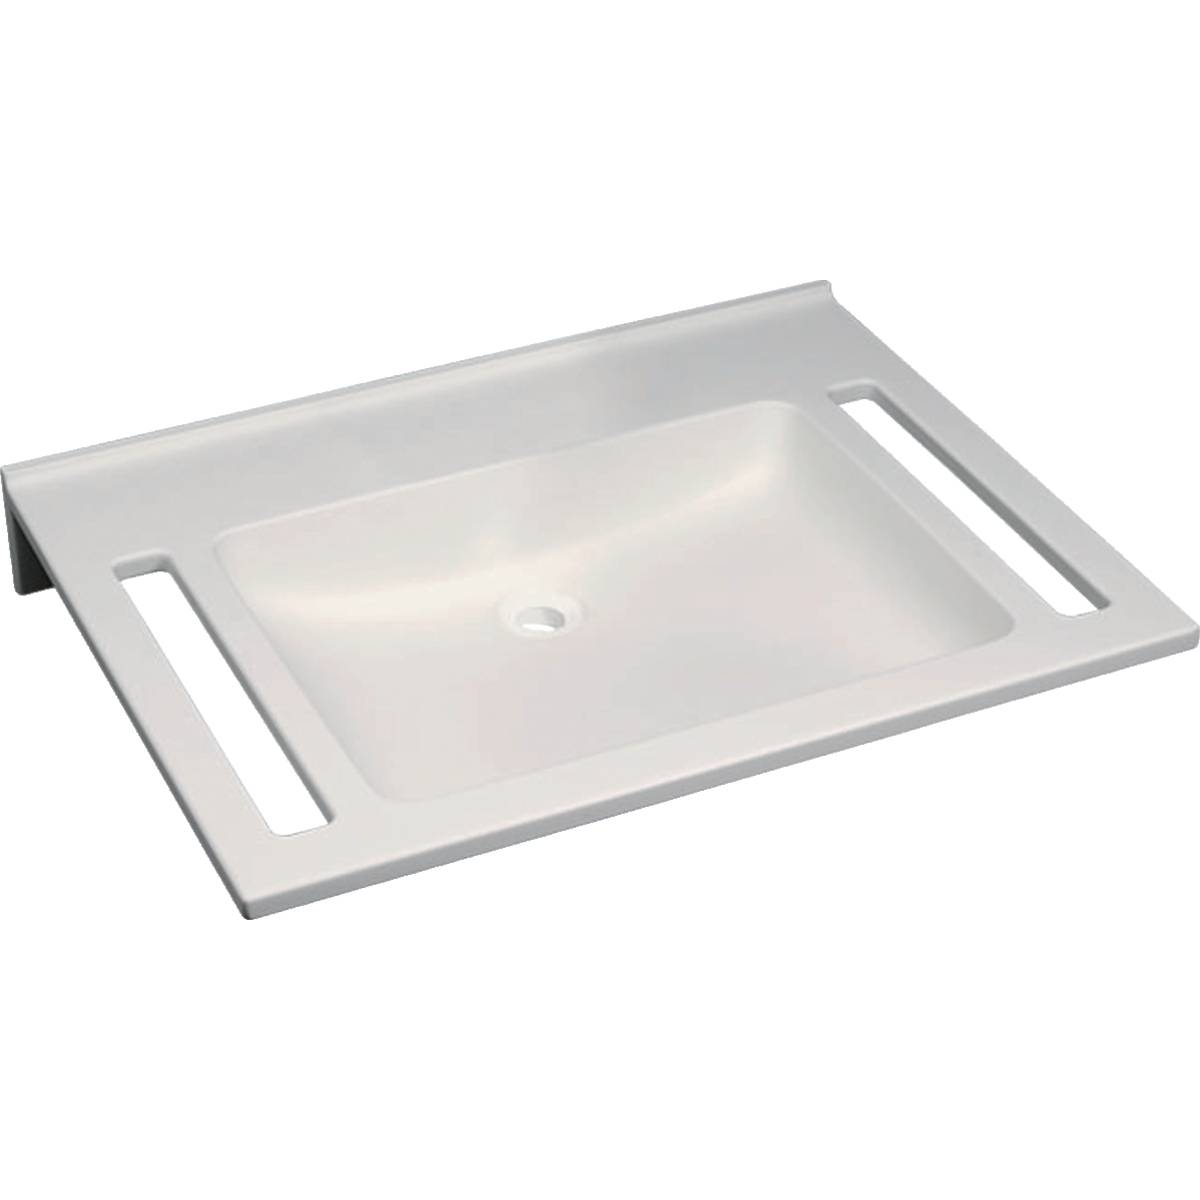 Publica washbasin, square design, with cut-outs, barrier-free